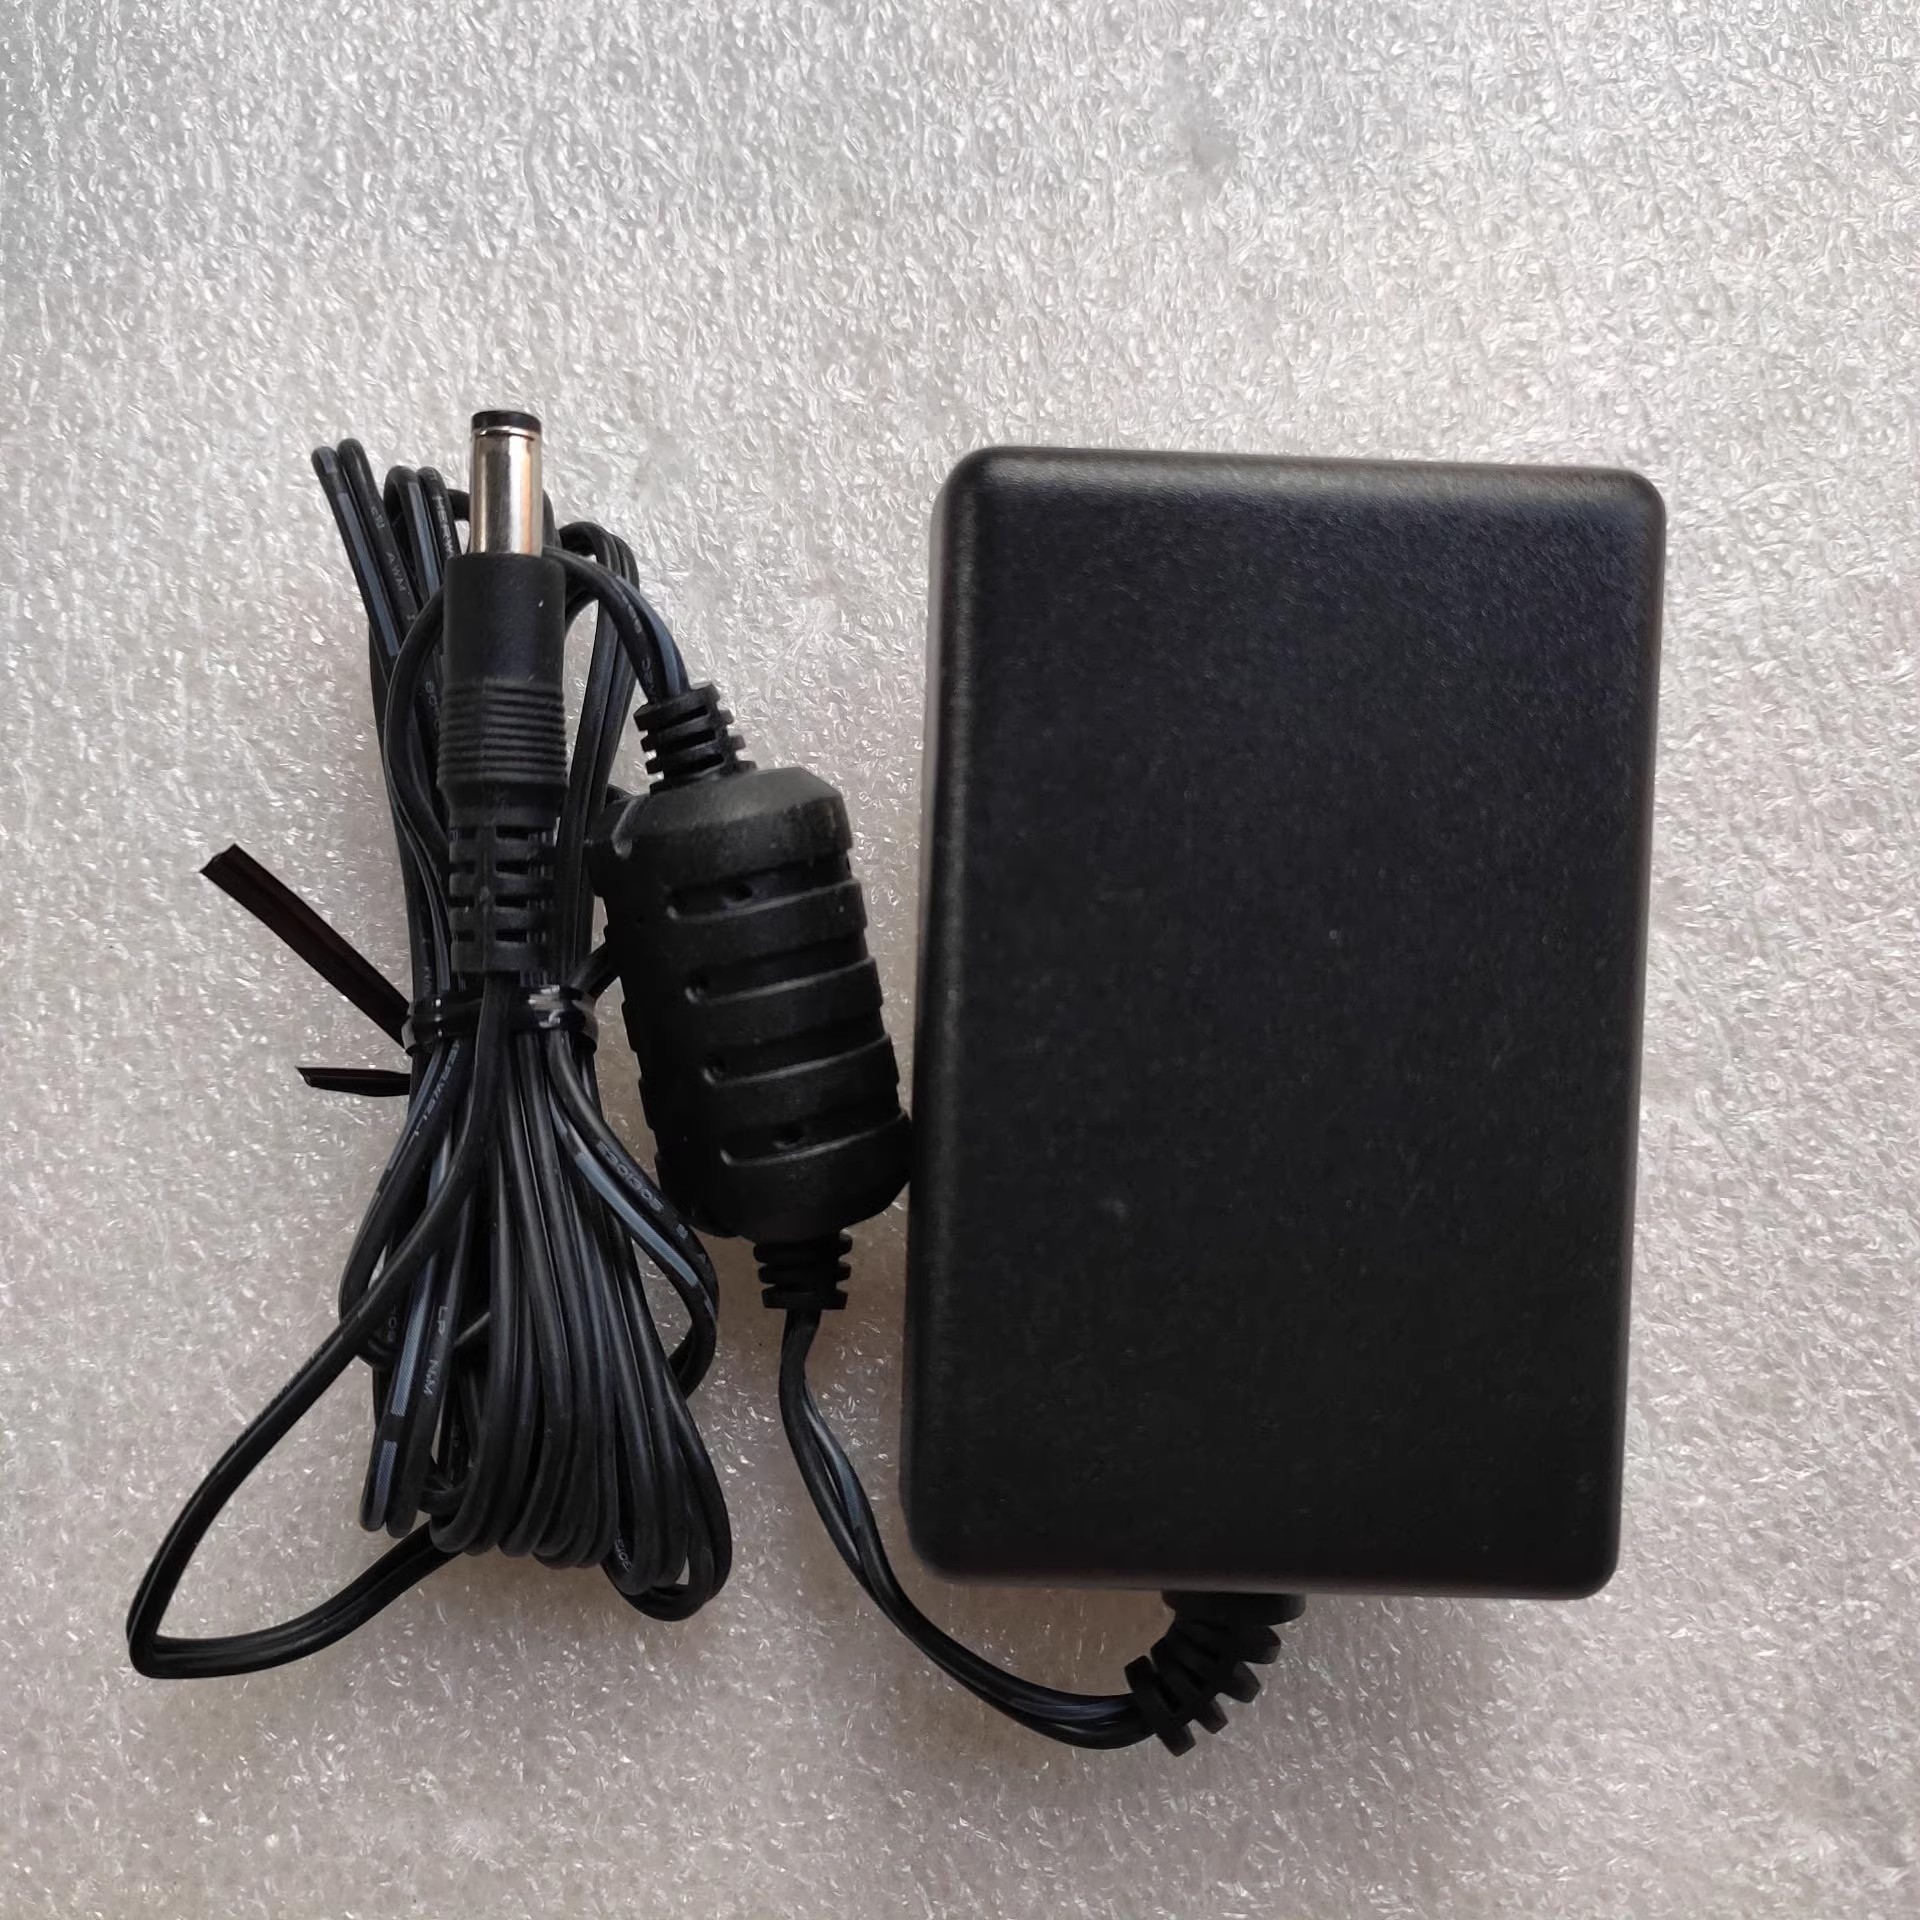 *Brand NEW*AS600-180-AA330 SOUND FREAQ 18V 3300MA AC DC ADAPTHE POWER Supply